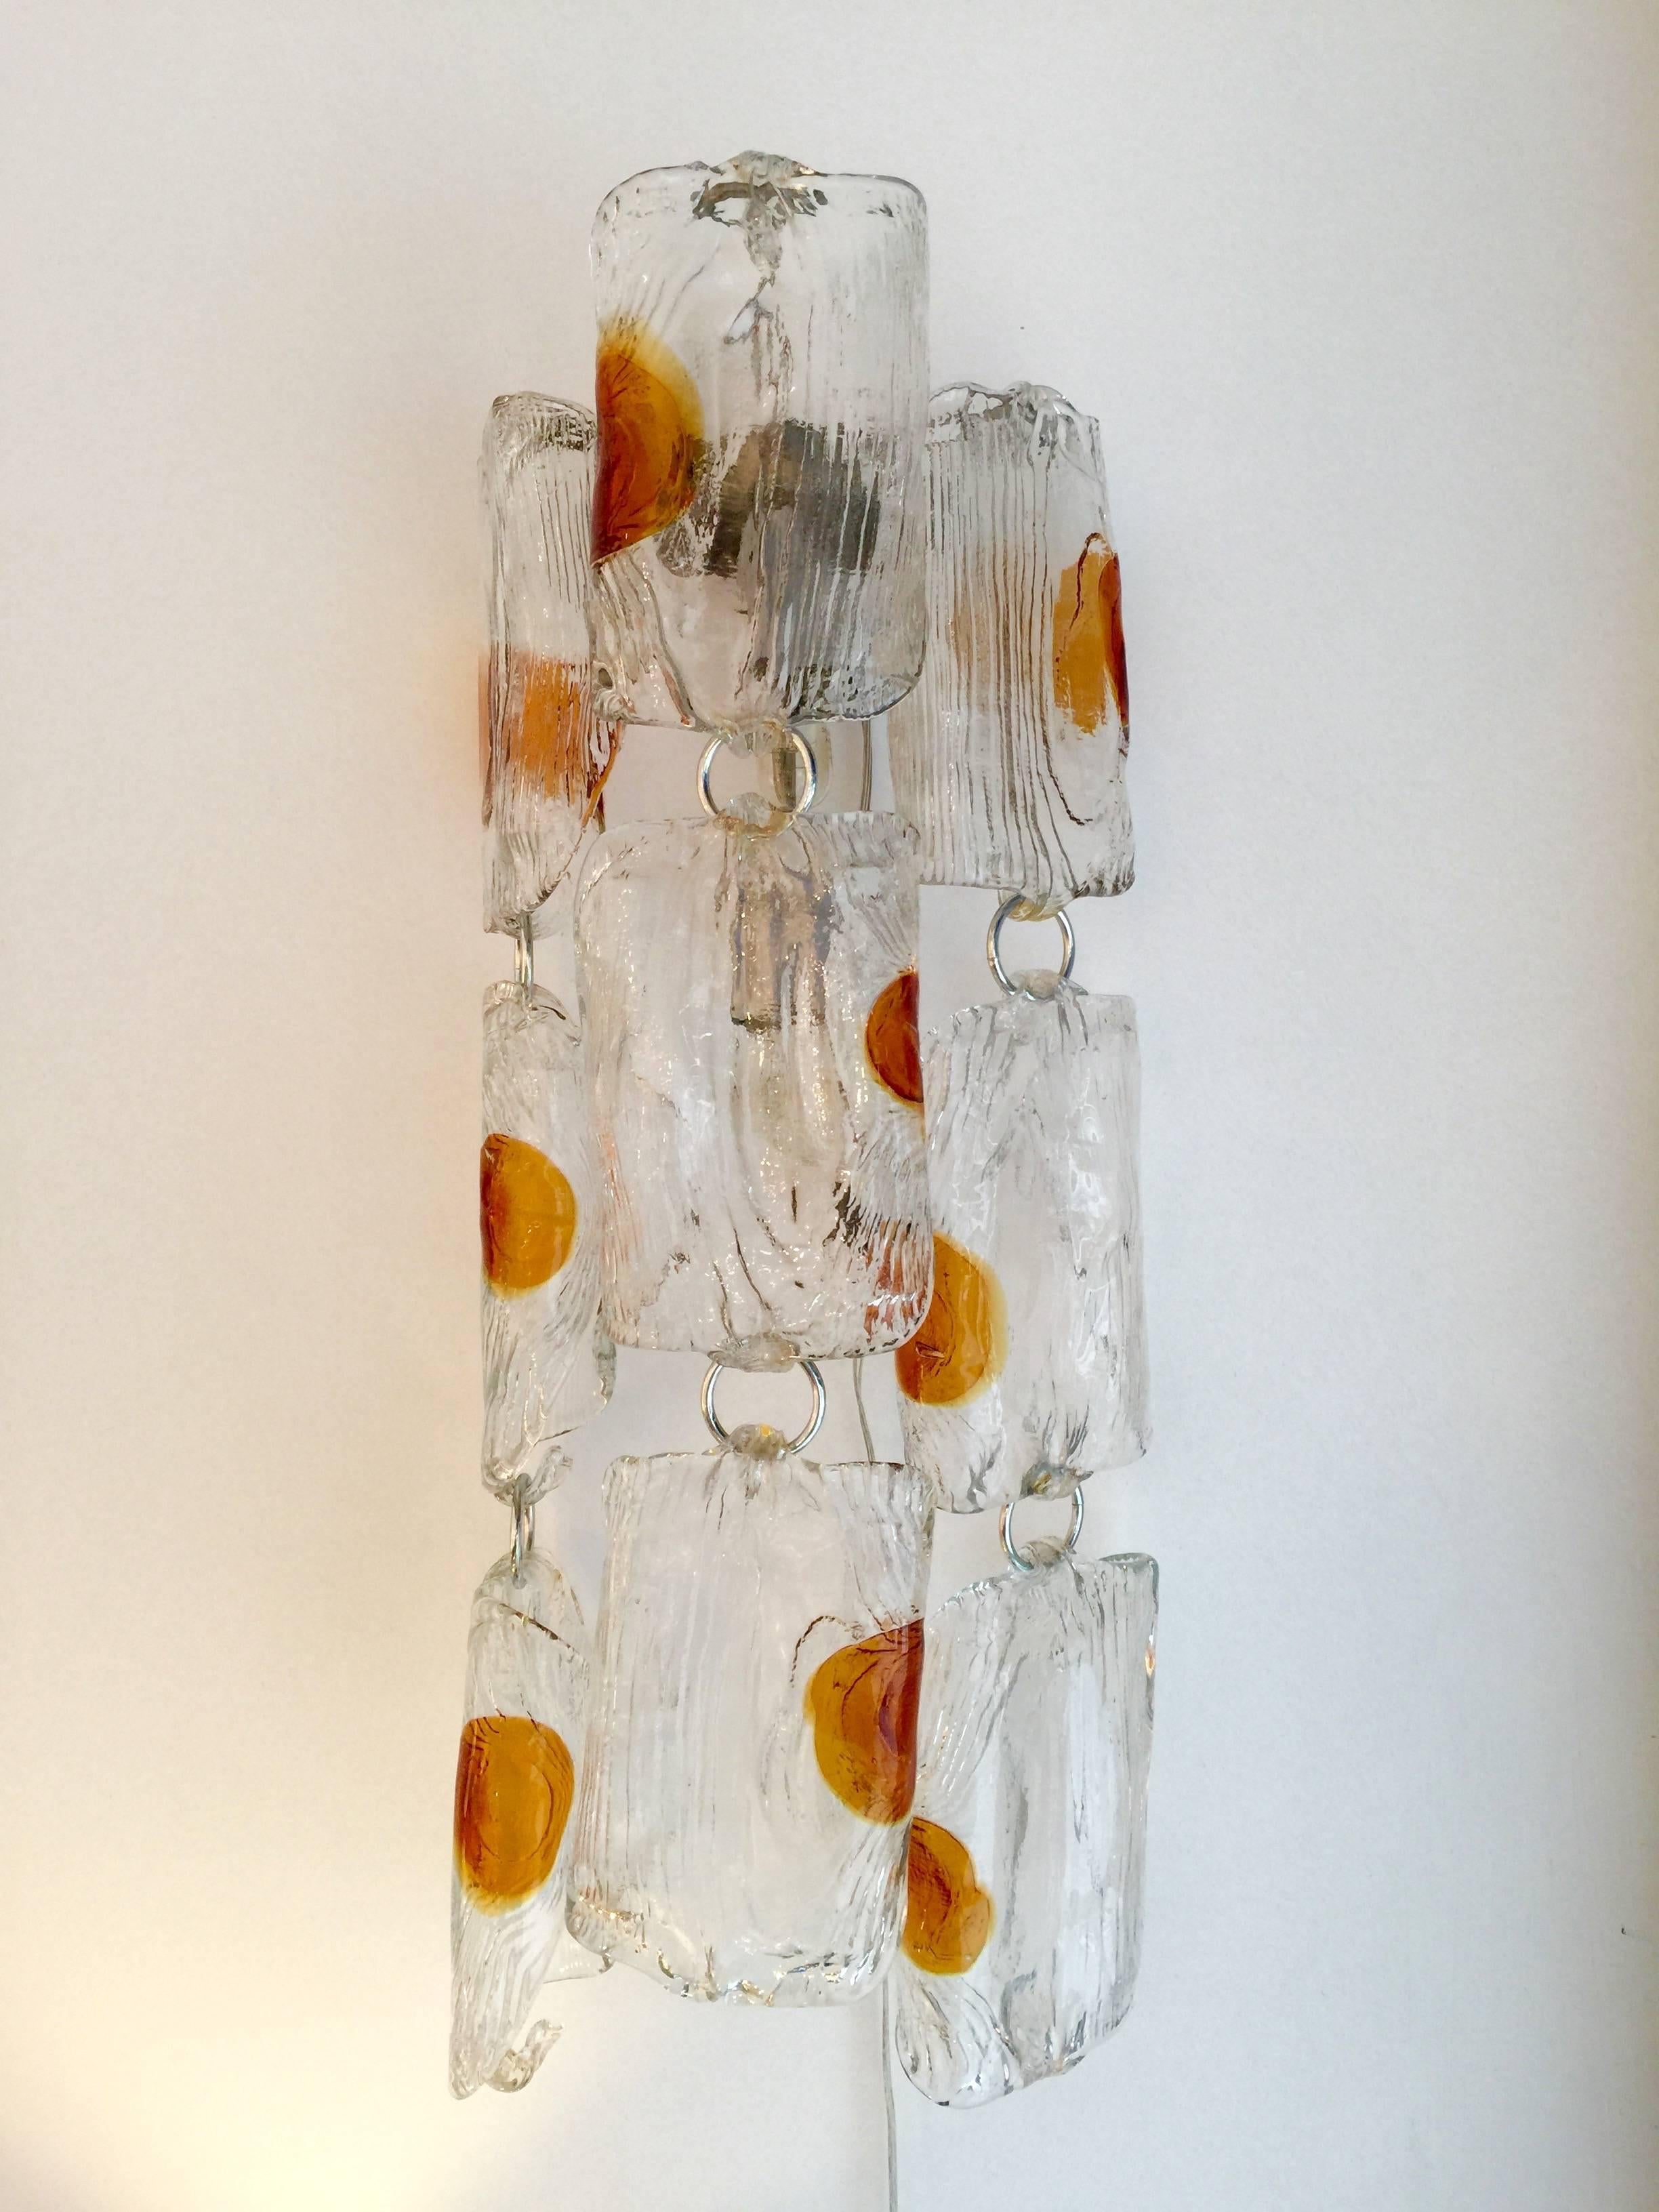 Rare pair of Mid-Century Modern hanging Murano glass sconces or wall lights by Toni Zuccheri for the manufacture Mazzega, 1970s. Those orange points in the glass are typical from Toni Zuccheri works. An italian design from the 70s. The glass